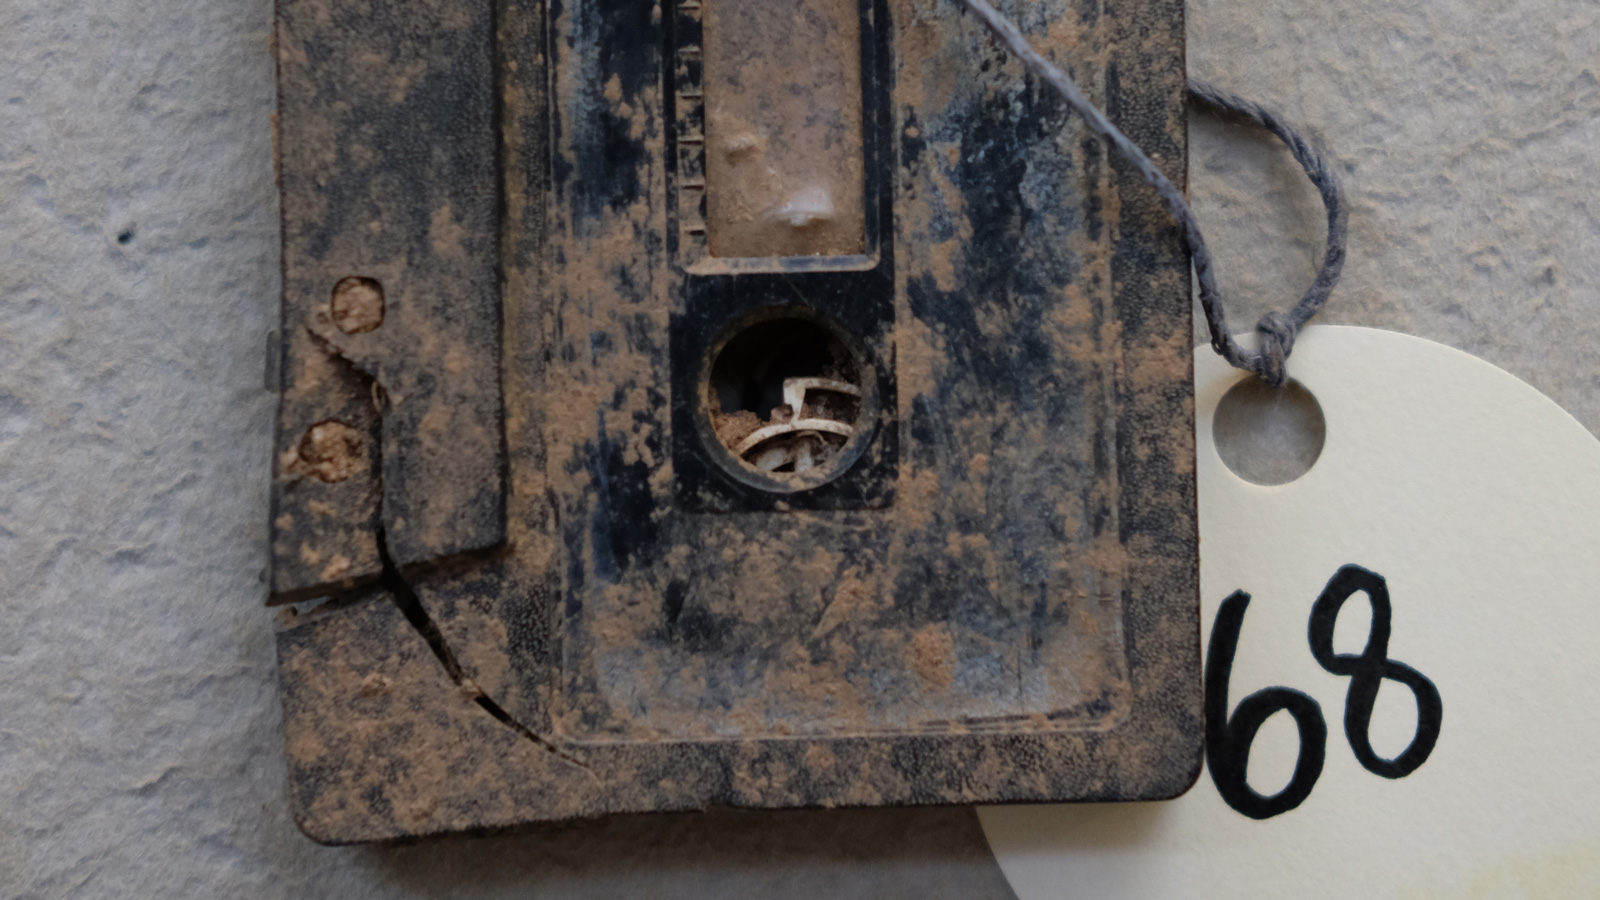 Close up of a cassette tape caked in mud with a tag that says "68" attached to it